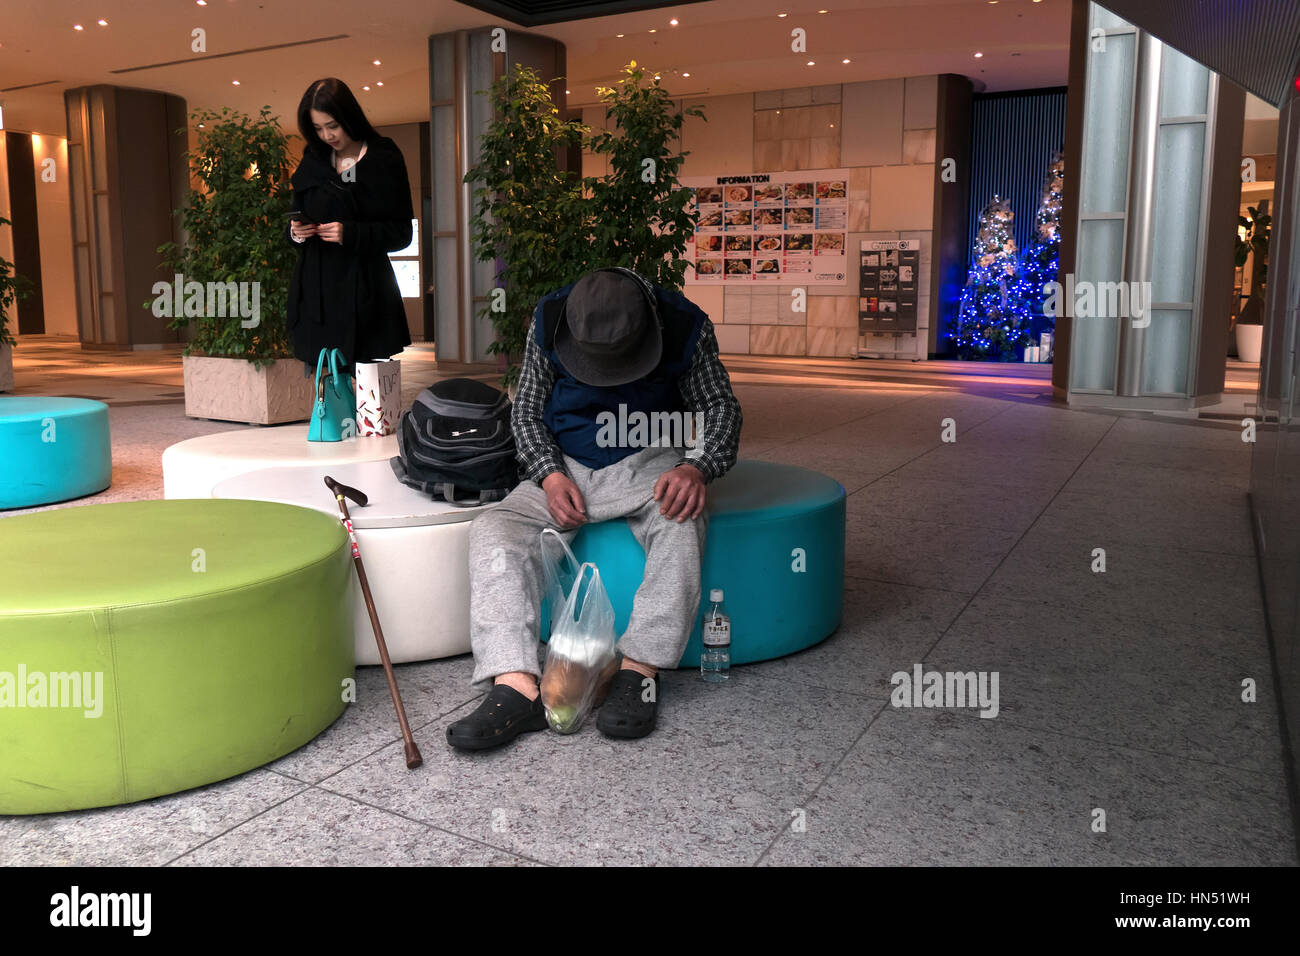 Beautiful Japanese woman texting on smartphone and homeless man sleeping in the lobby of a modern building. Tokyo, Japan, Asia Stock Photo